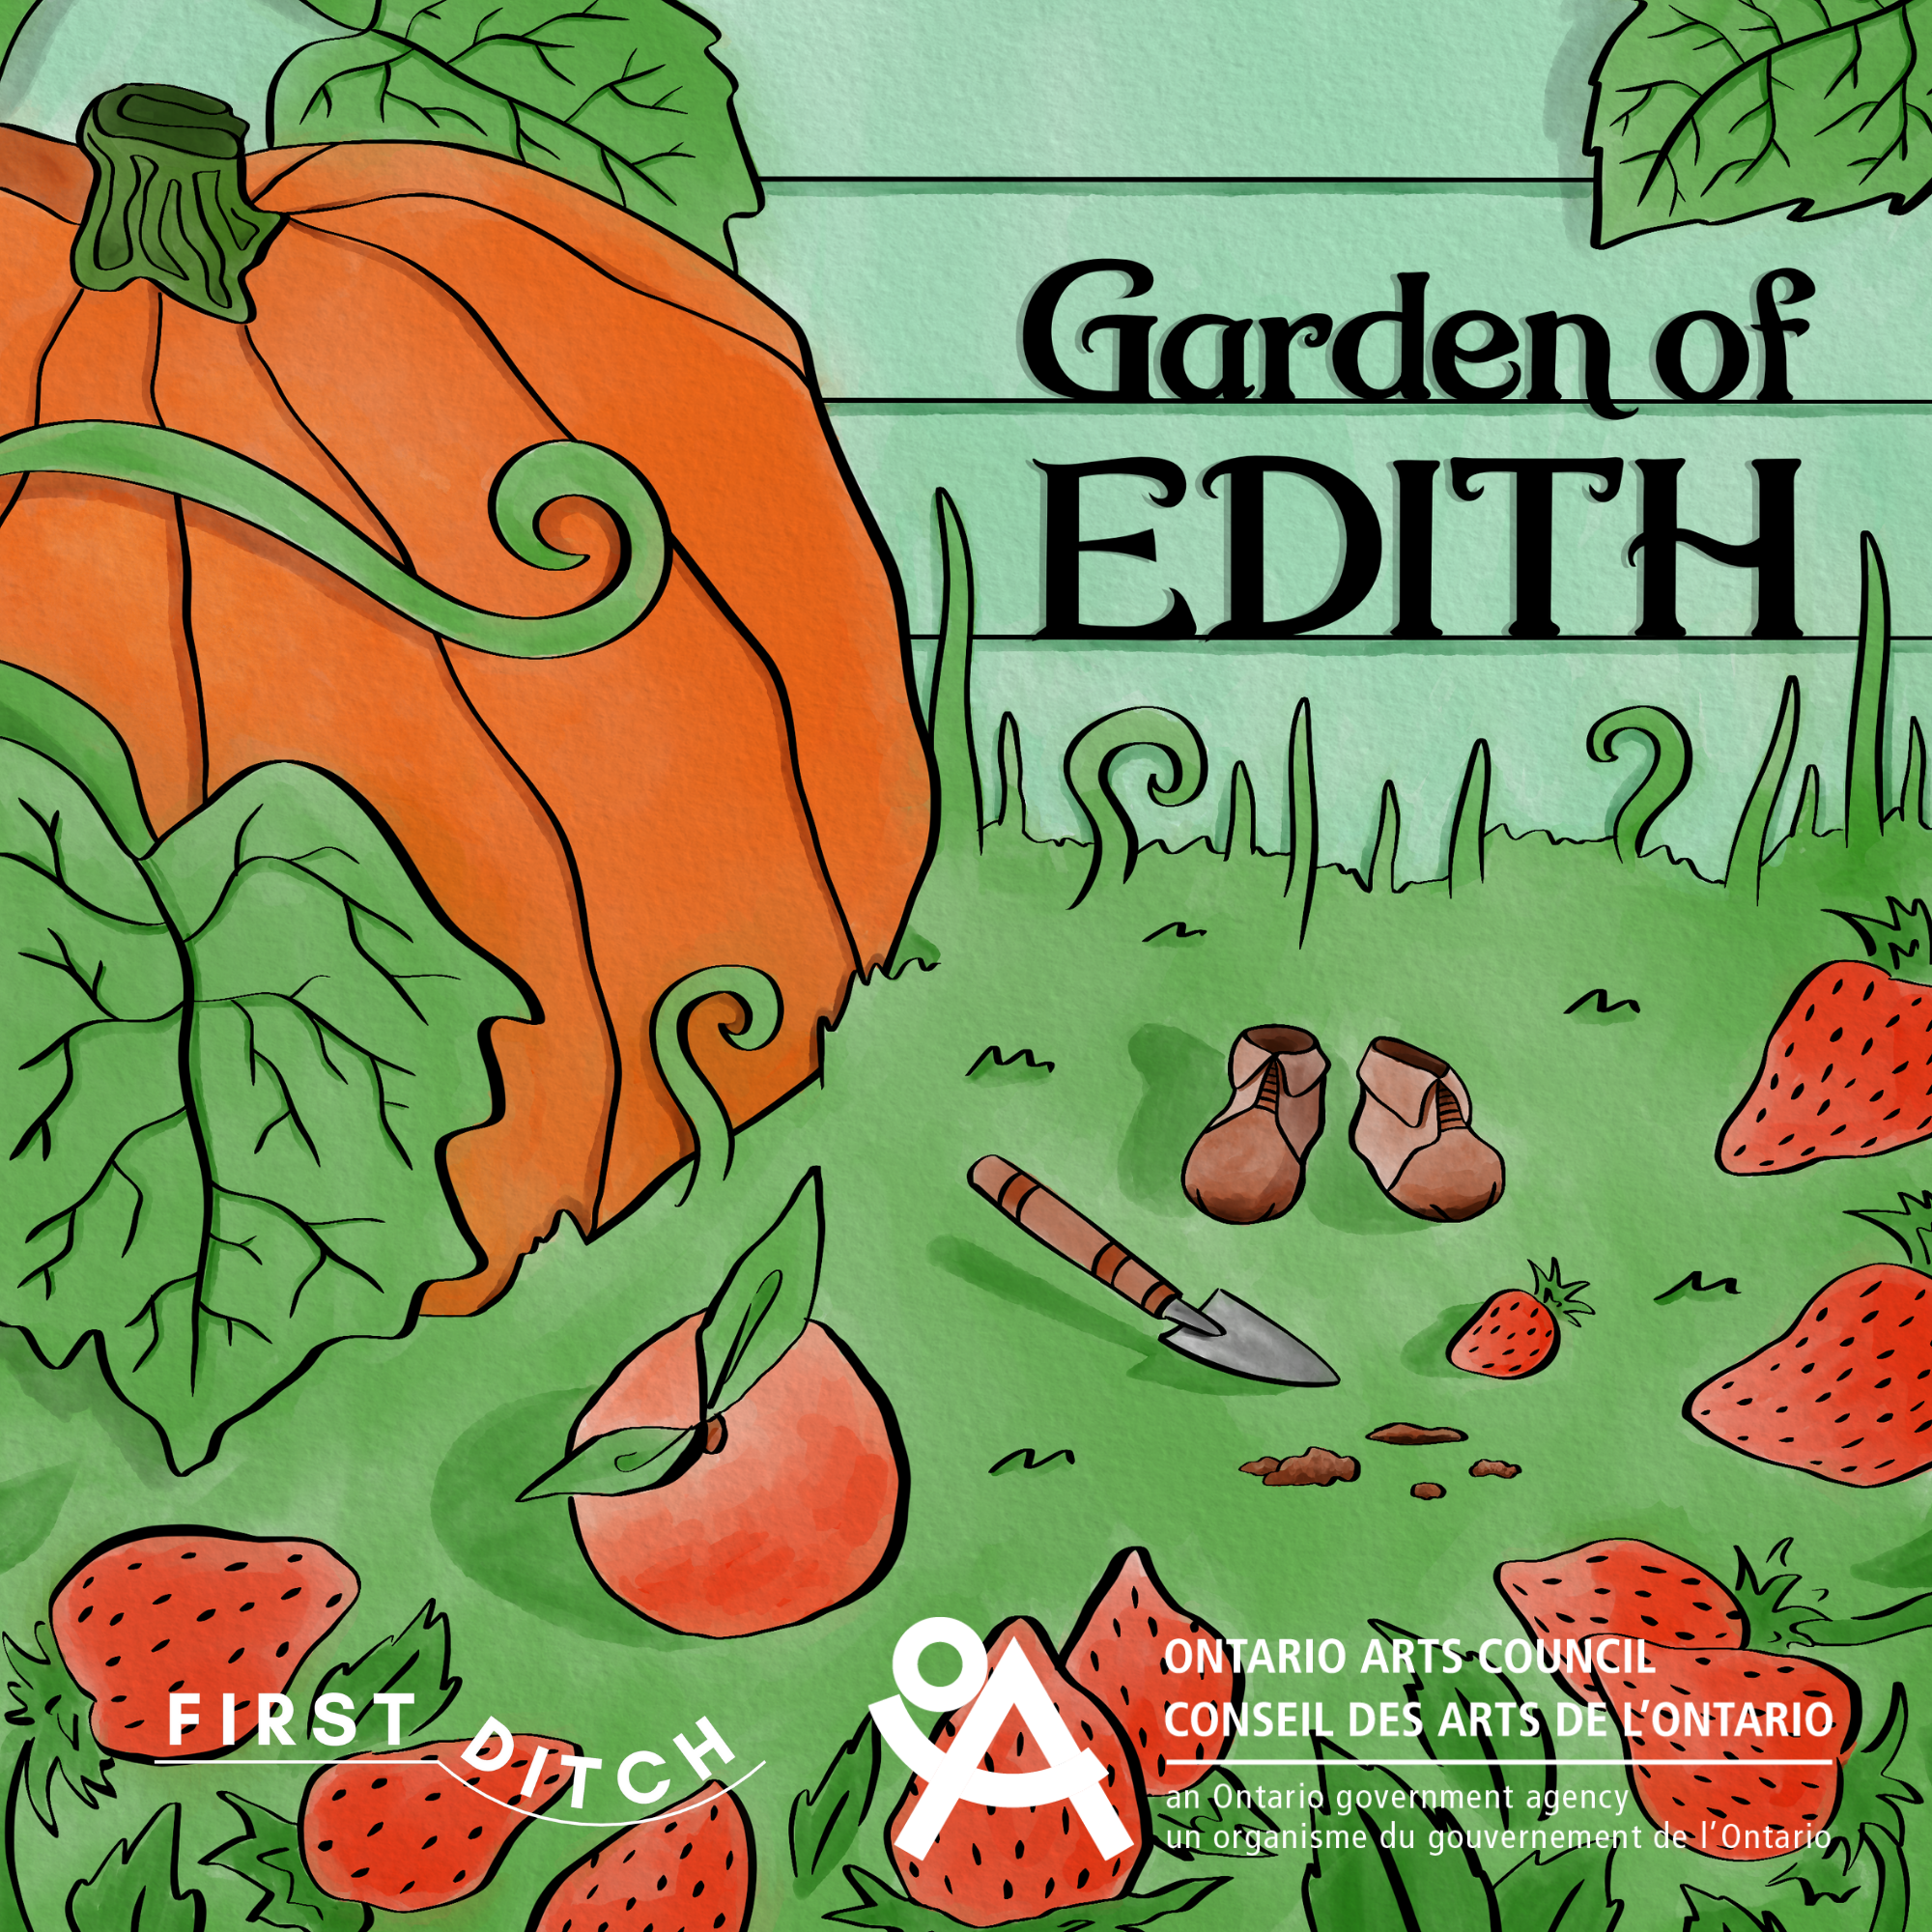 A pumpkin, orange, and strawberries are growing in grass. Very tiny boots and a very tiny garden shovel are on the grass. Text reads "Garden of Edith," "First Ditch," "Ontario Arts Council"